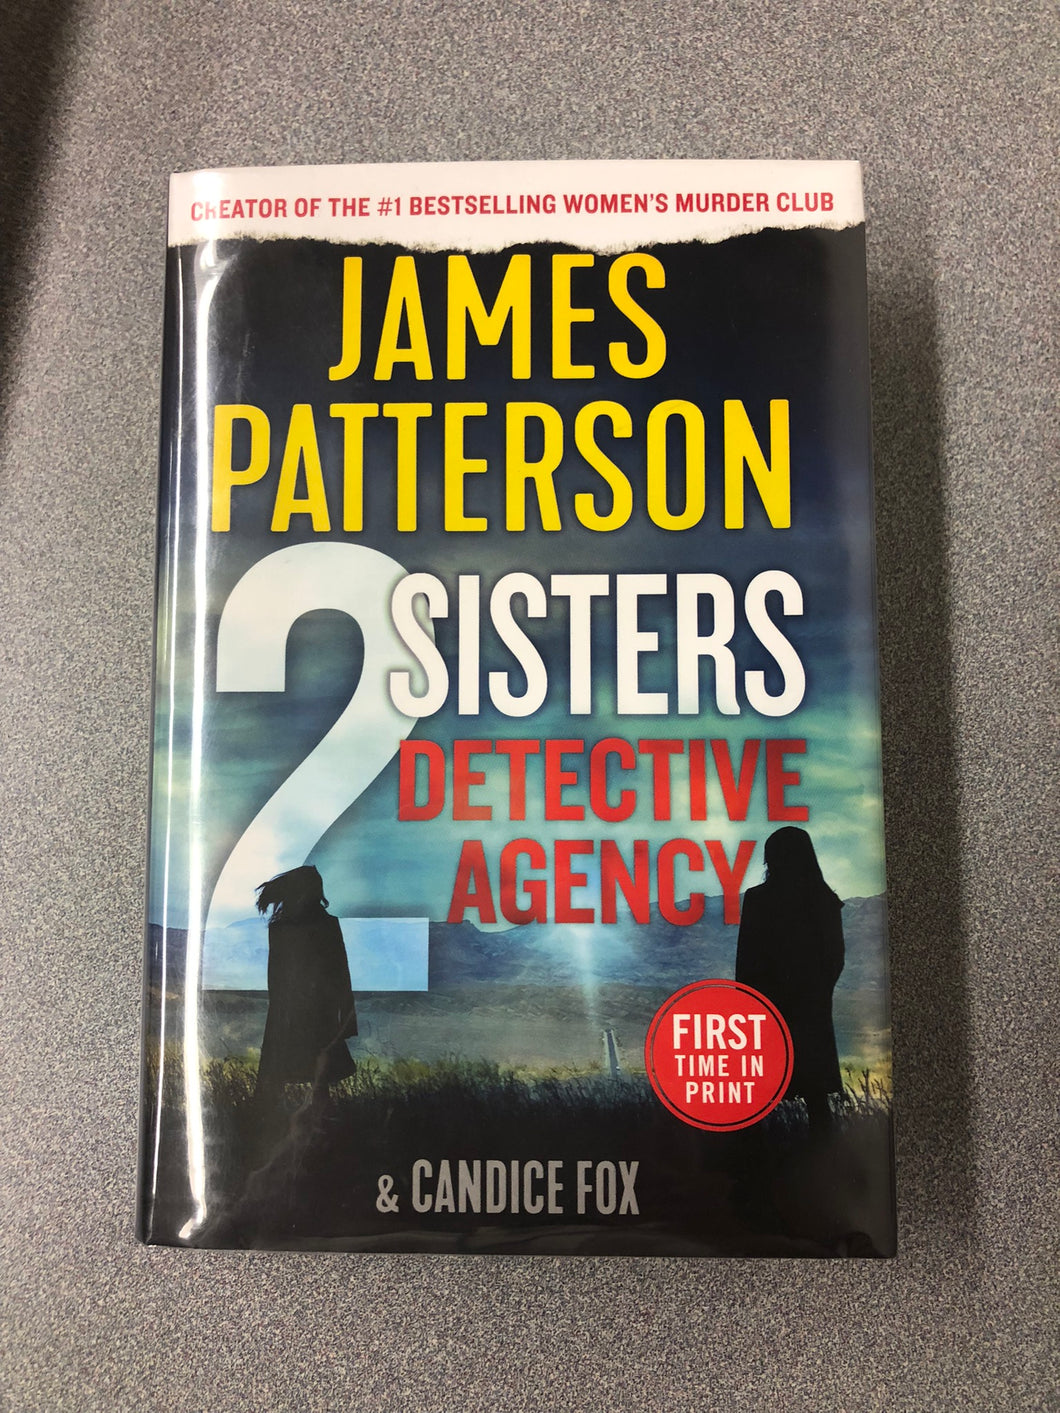 Patterson, James, 2 Sisters Detective Agency – October 5, 2021 My 2/22